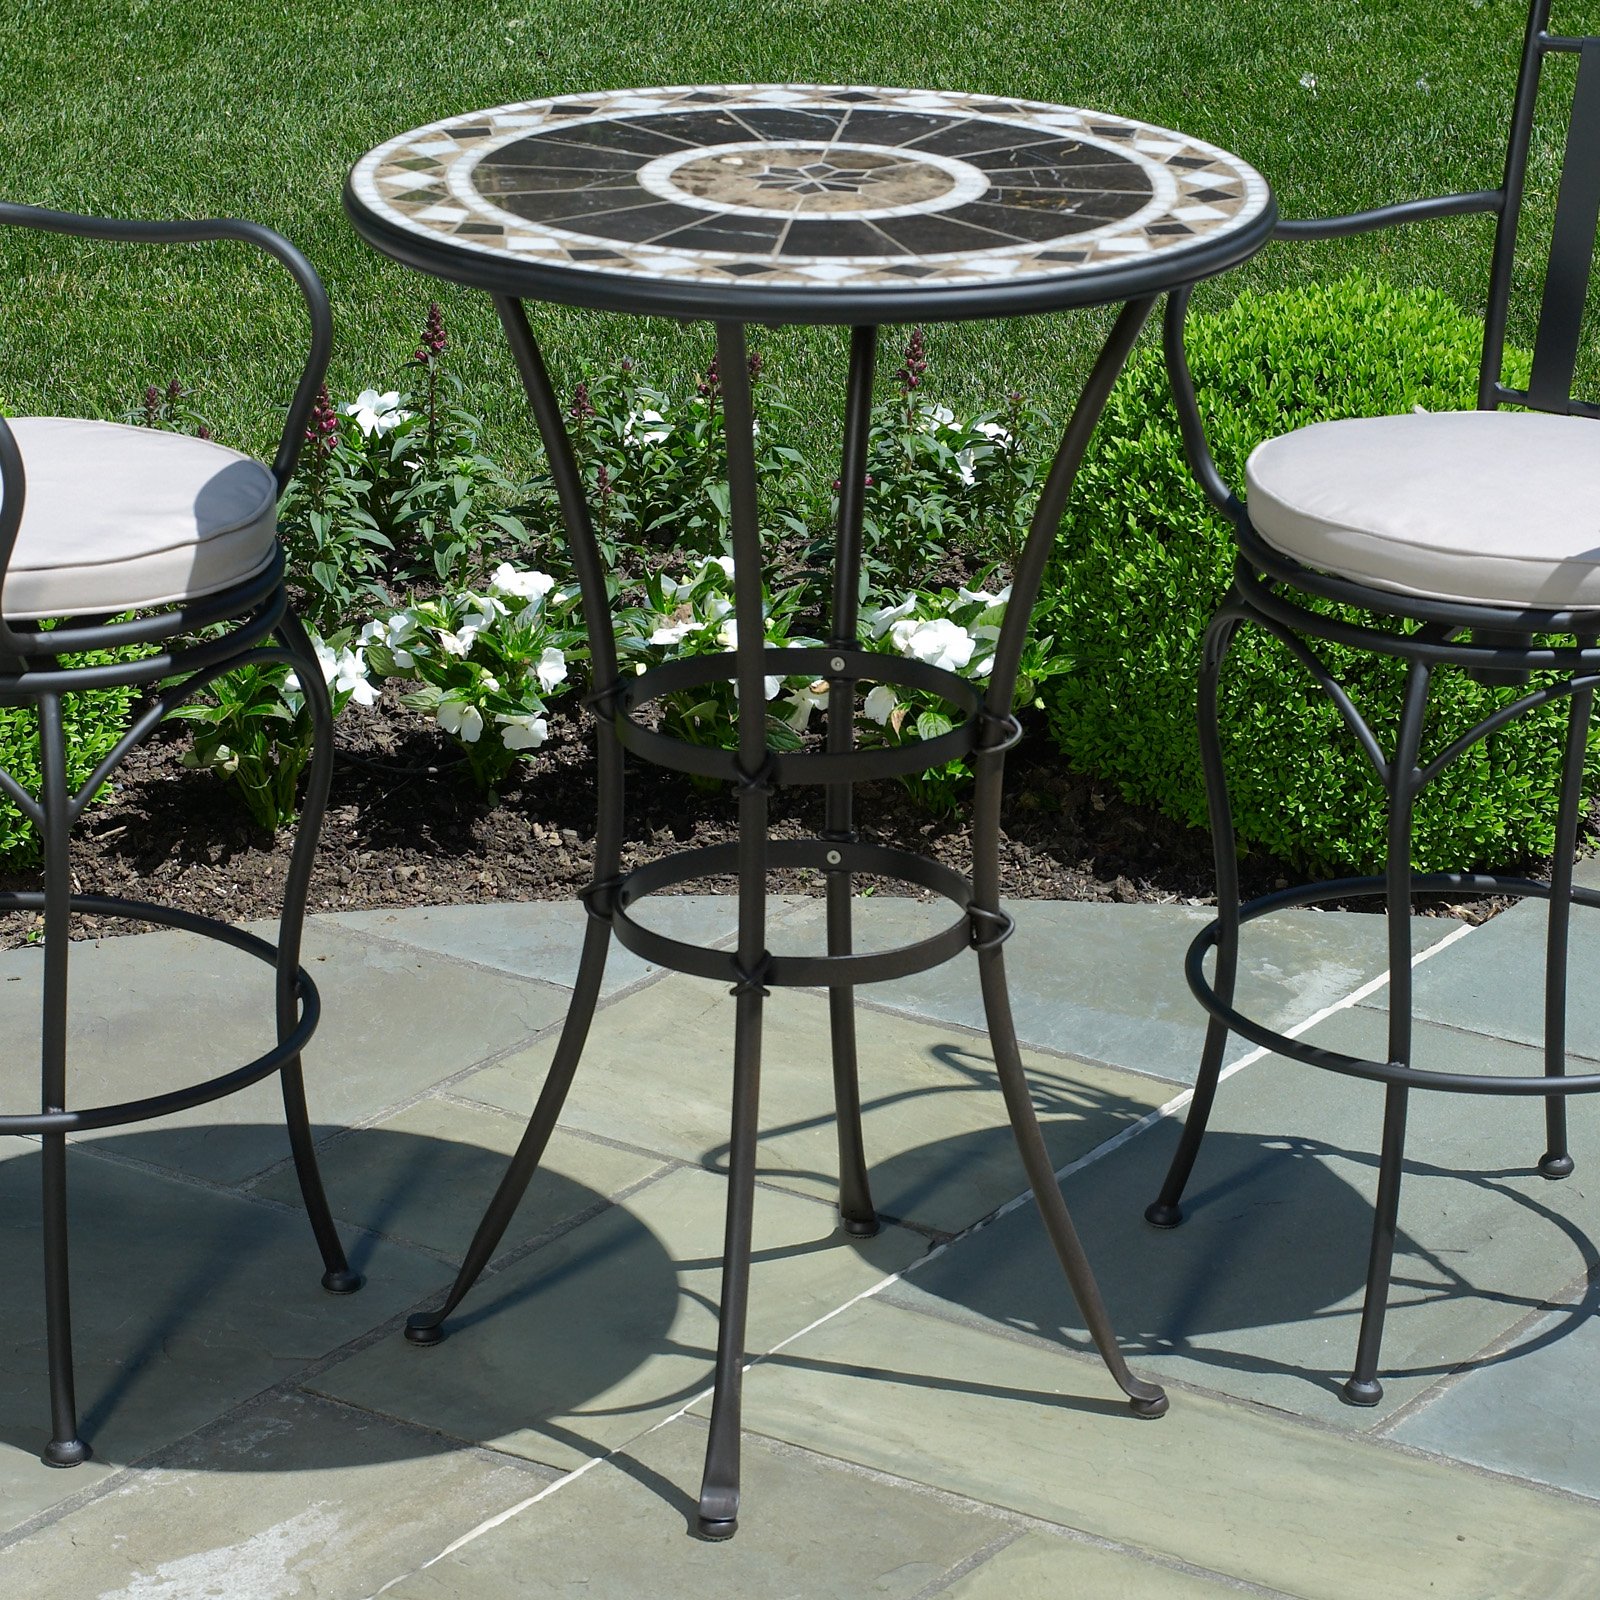 small patio table small round patio table and chairs target outdoor furniture VIAEZIN